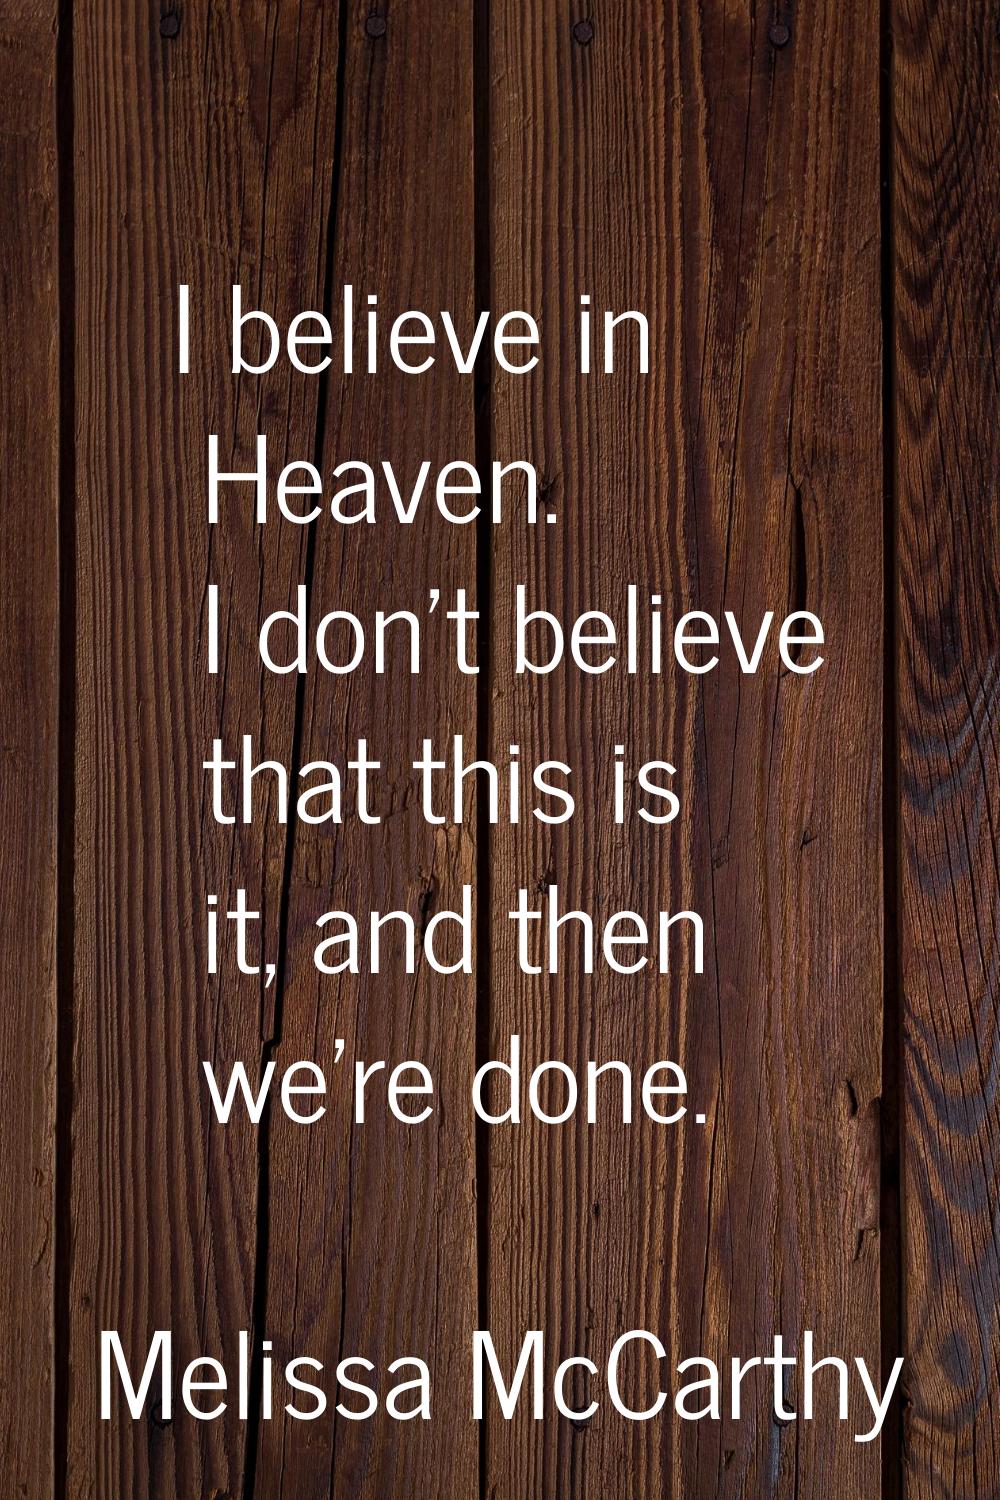 I believe in Heaven. I don't believe that this is it, and then we're done.